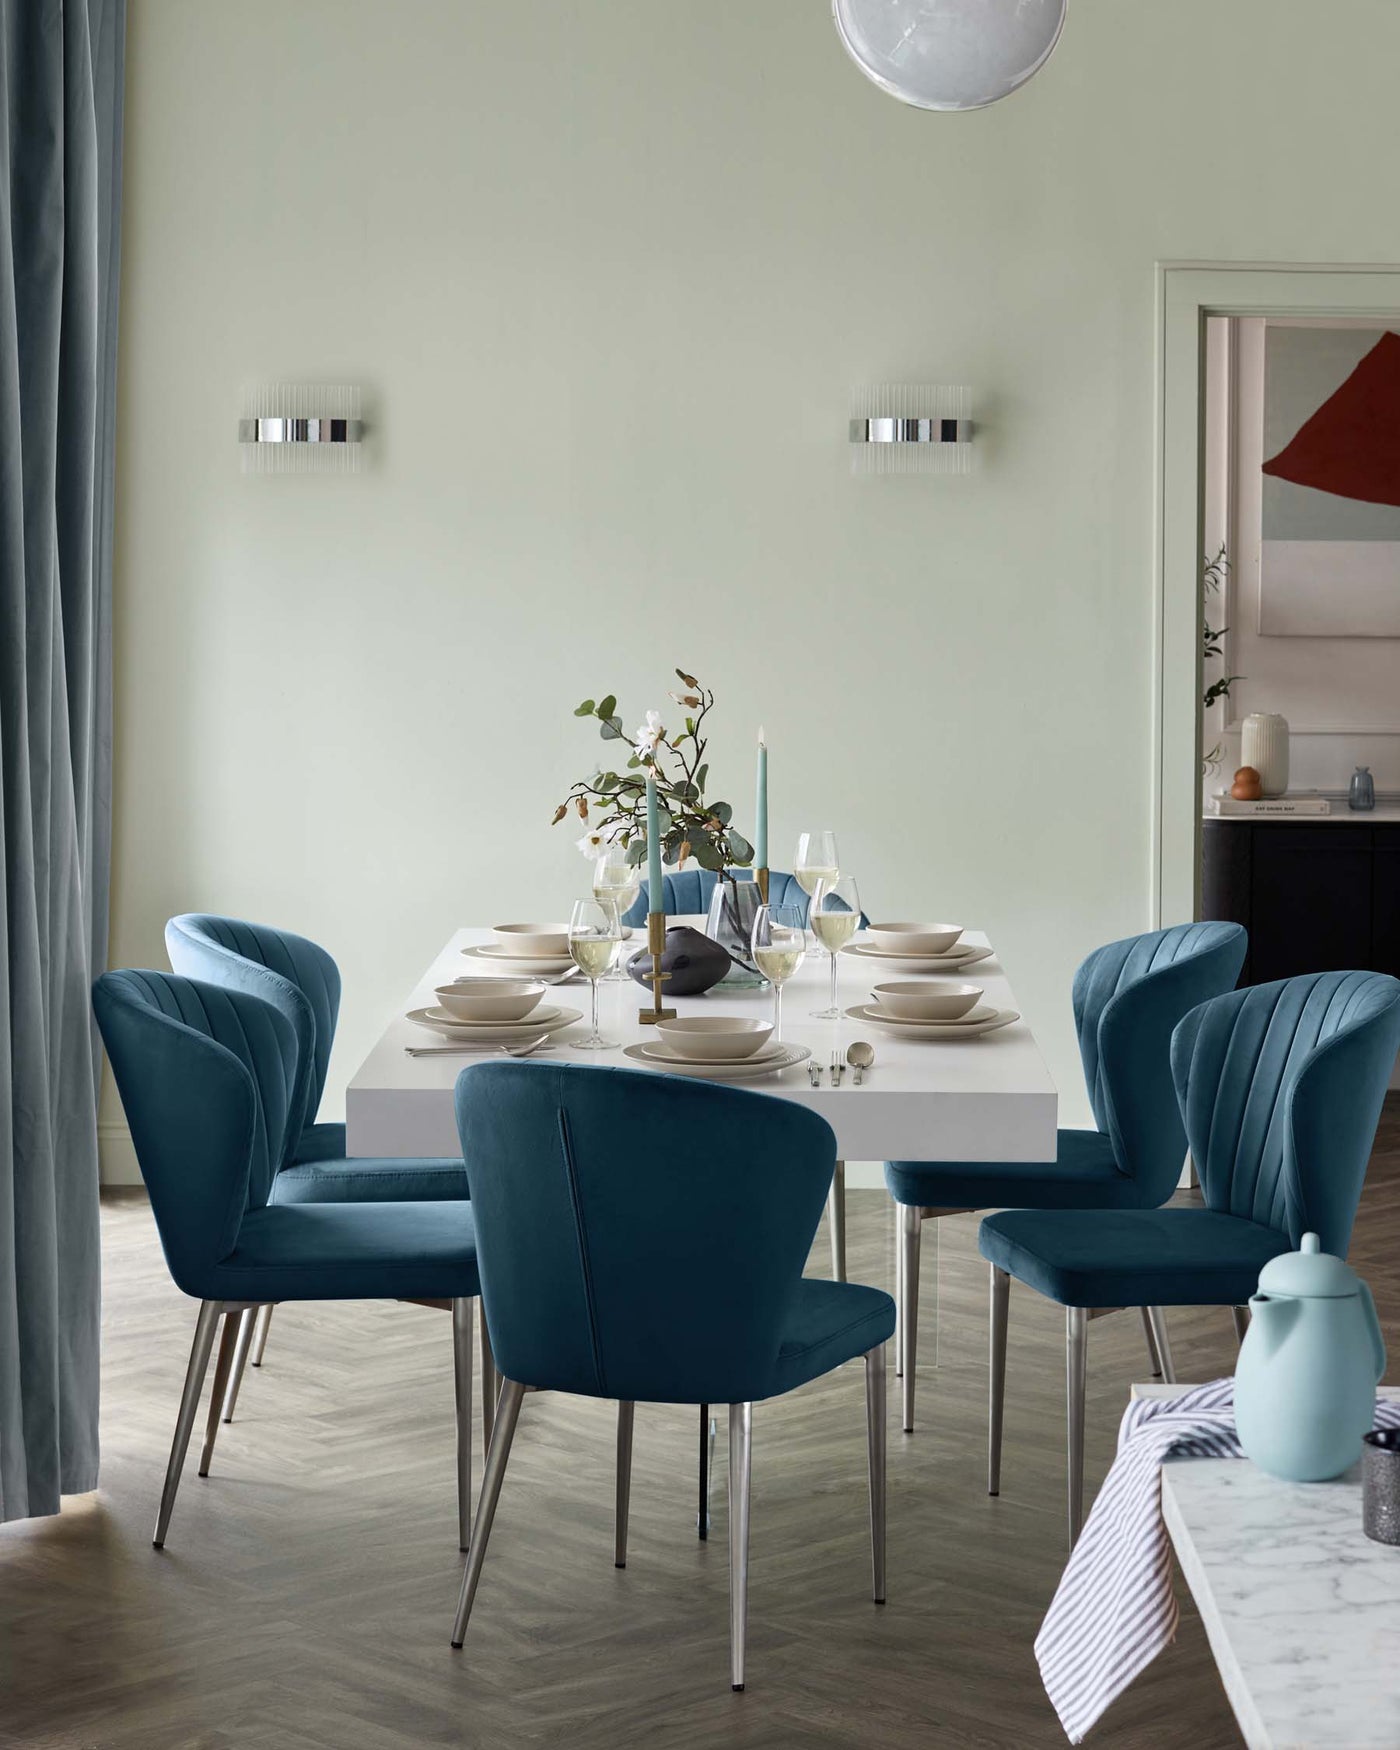 A contemporary dining room featuring an elegant white marble-topped table with a slender rectangular silhouette, paired with six luxurious teal blue upholstered chairs displaying curved backrests and vertical channel tufting. The chairs stand on sleek, slender metallic legs, complementing the table's clean lines. The set exudes a modern yet timeless appeal, perfect for both casual and formal gatherings.